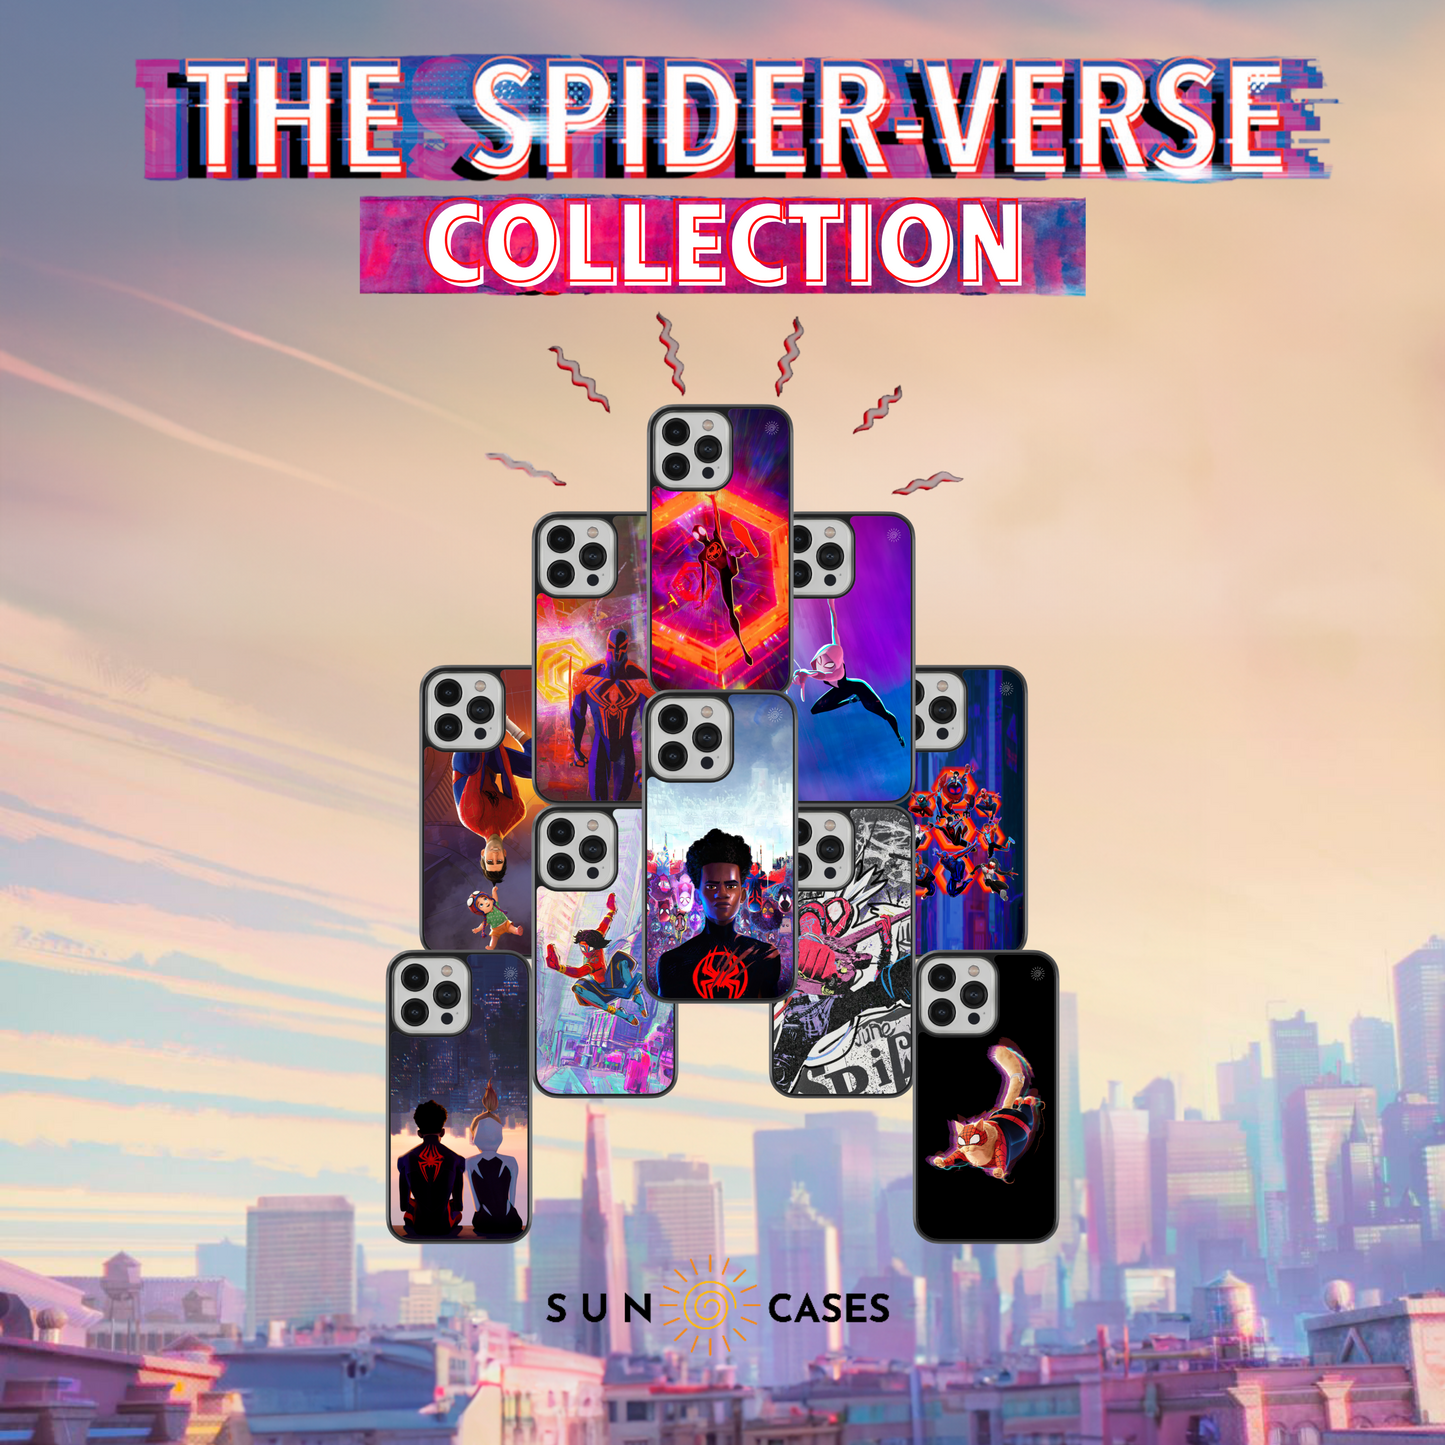 The Spider-Verse Collection - Spiders